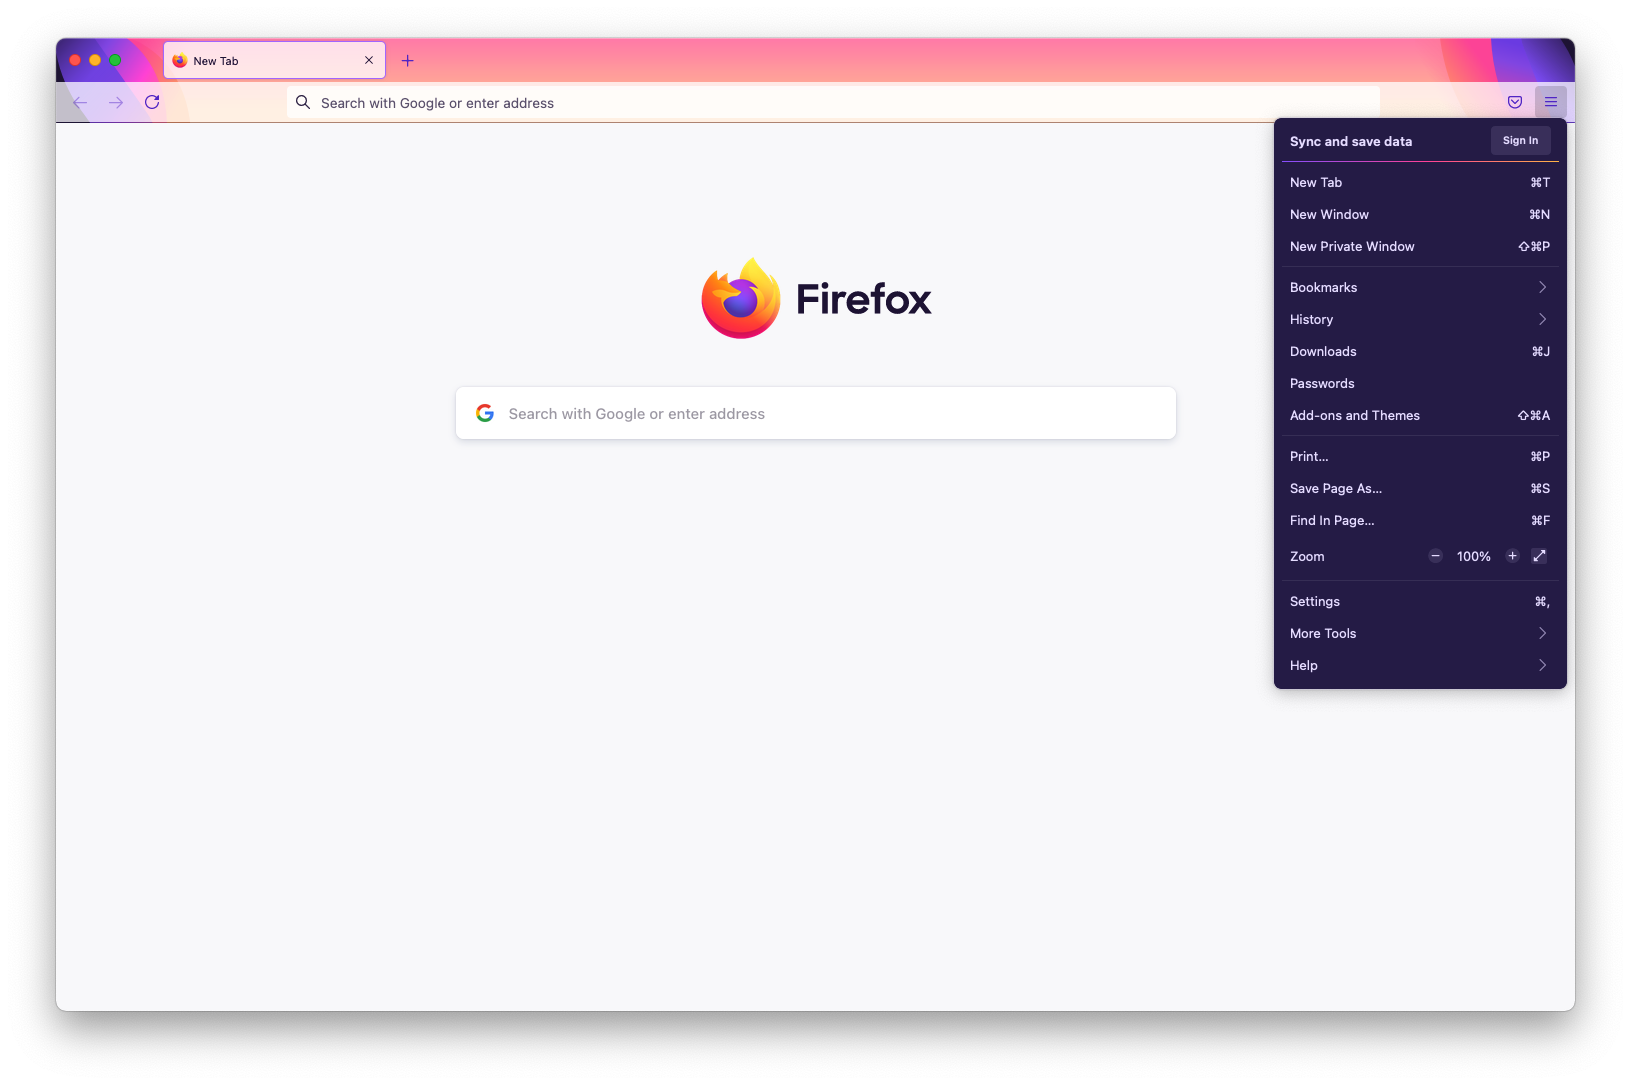 Image of a Firefox browser window with the application menu opened on the right.